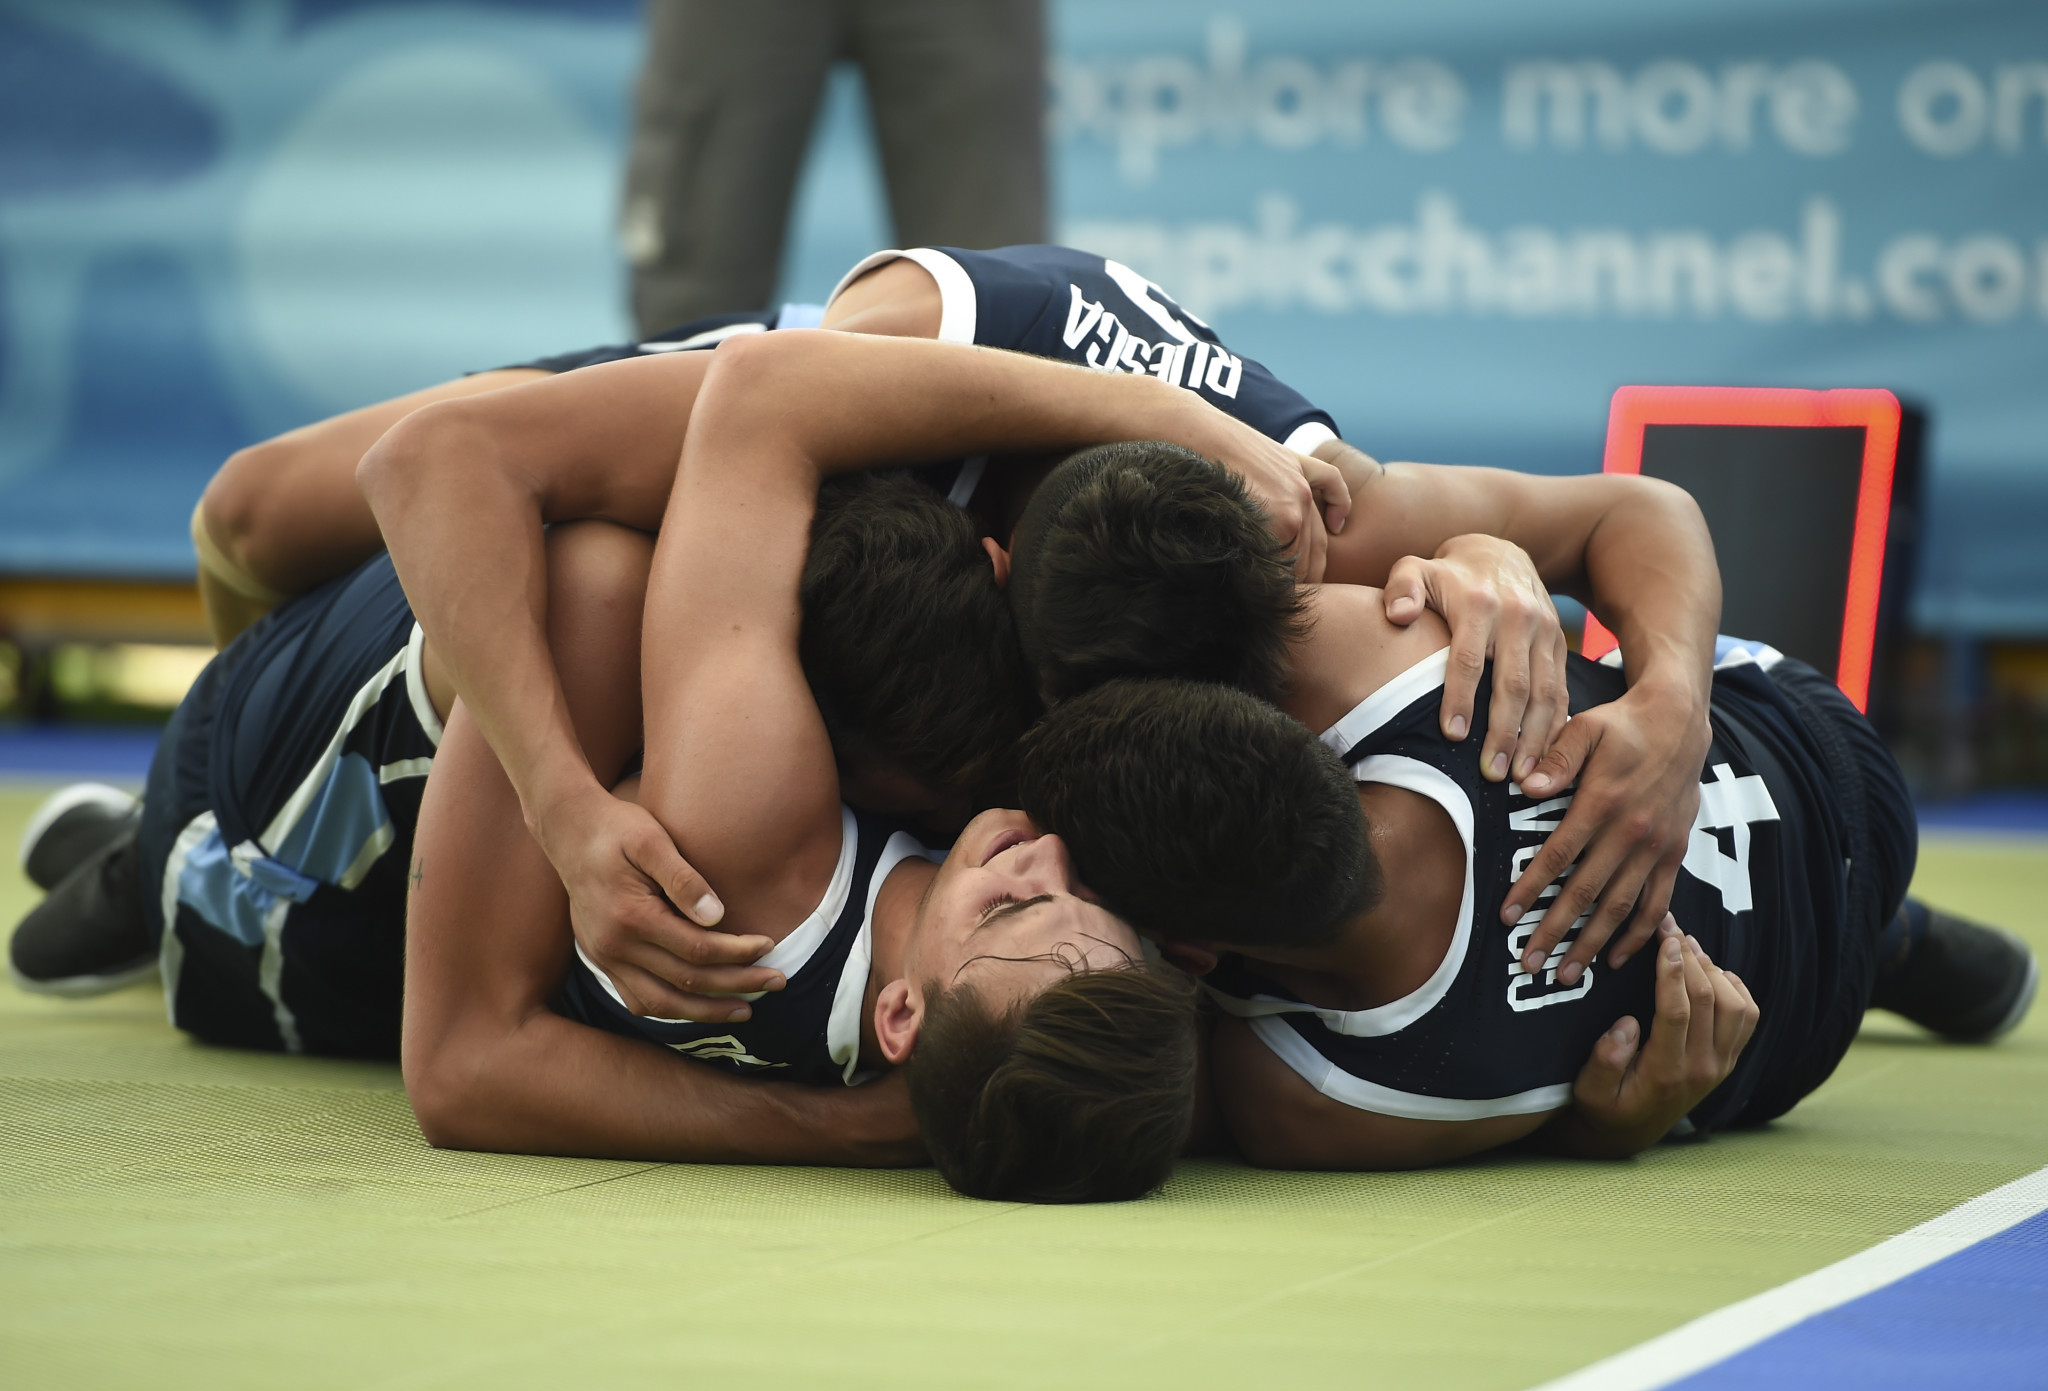 Argentina win men's 3x3 basketball title as first karate and boxing gold medals claimed at Buenos Aires 2018